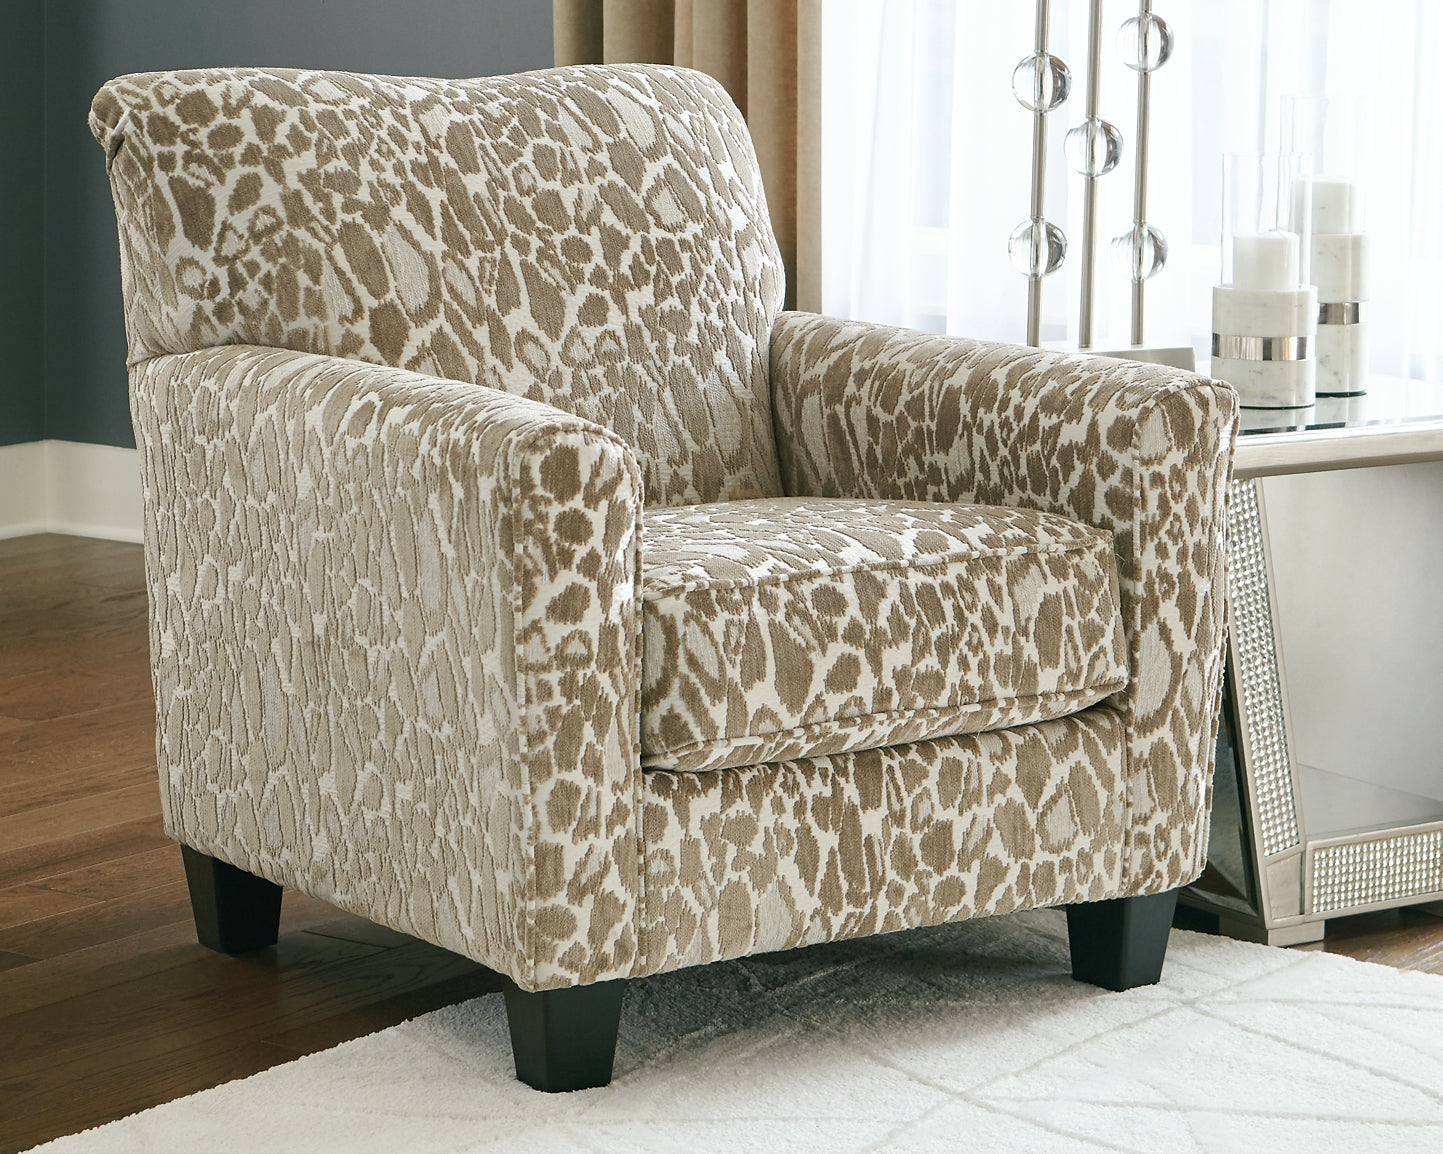 Dovemont Accent Chair at Cloud 9 Mattress & Furniture furniture, home furnishing, home decor